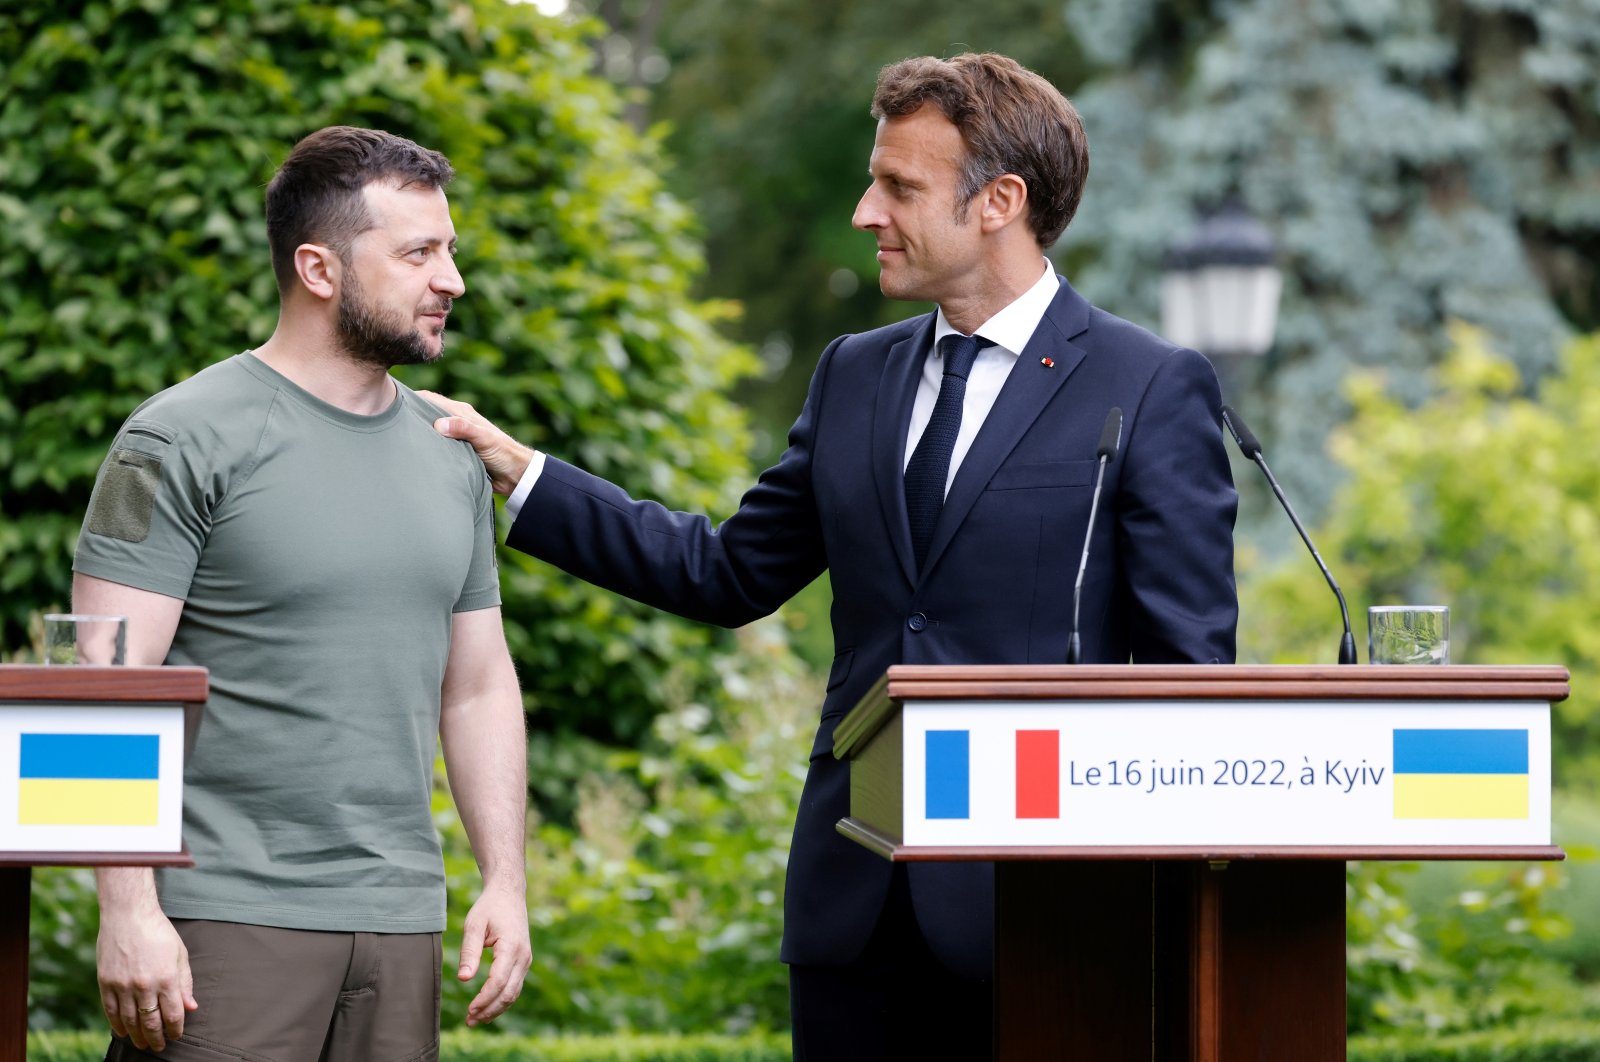 Ukrainian President Volodymyr Zelenskyy (L) and French President Emmanuel Macron look at each other during a press conference in Kyiv, Ukraine, June 16, 2022. (AP Photo)